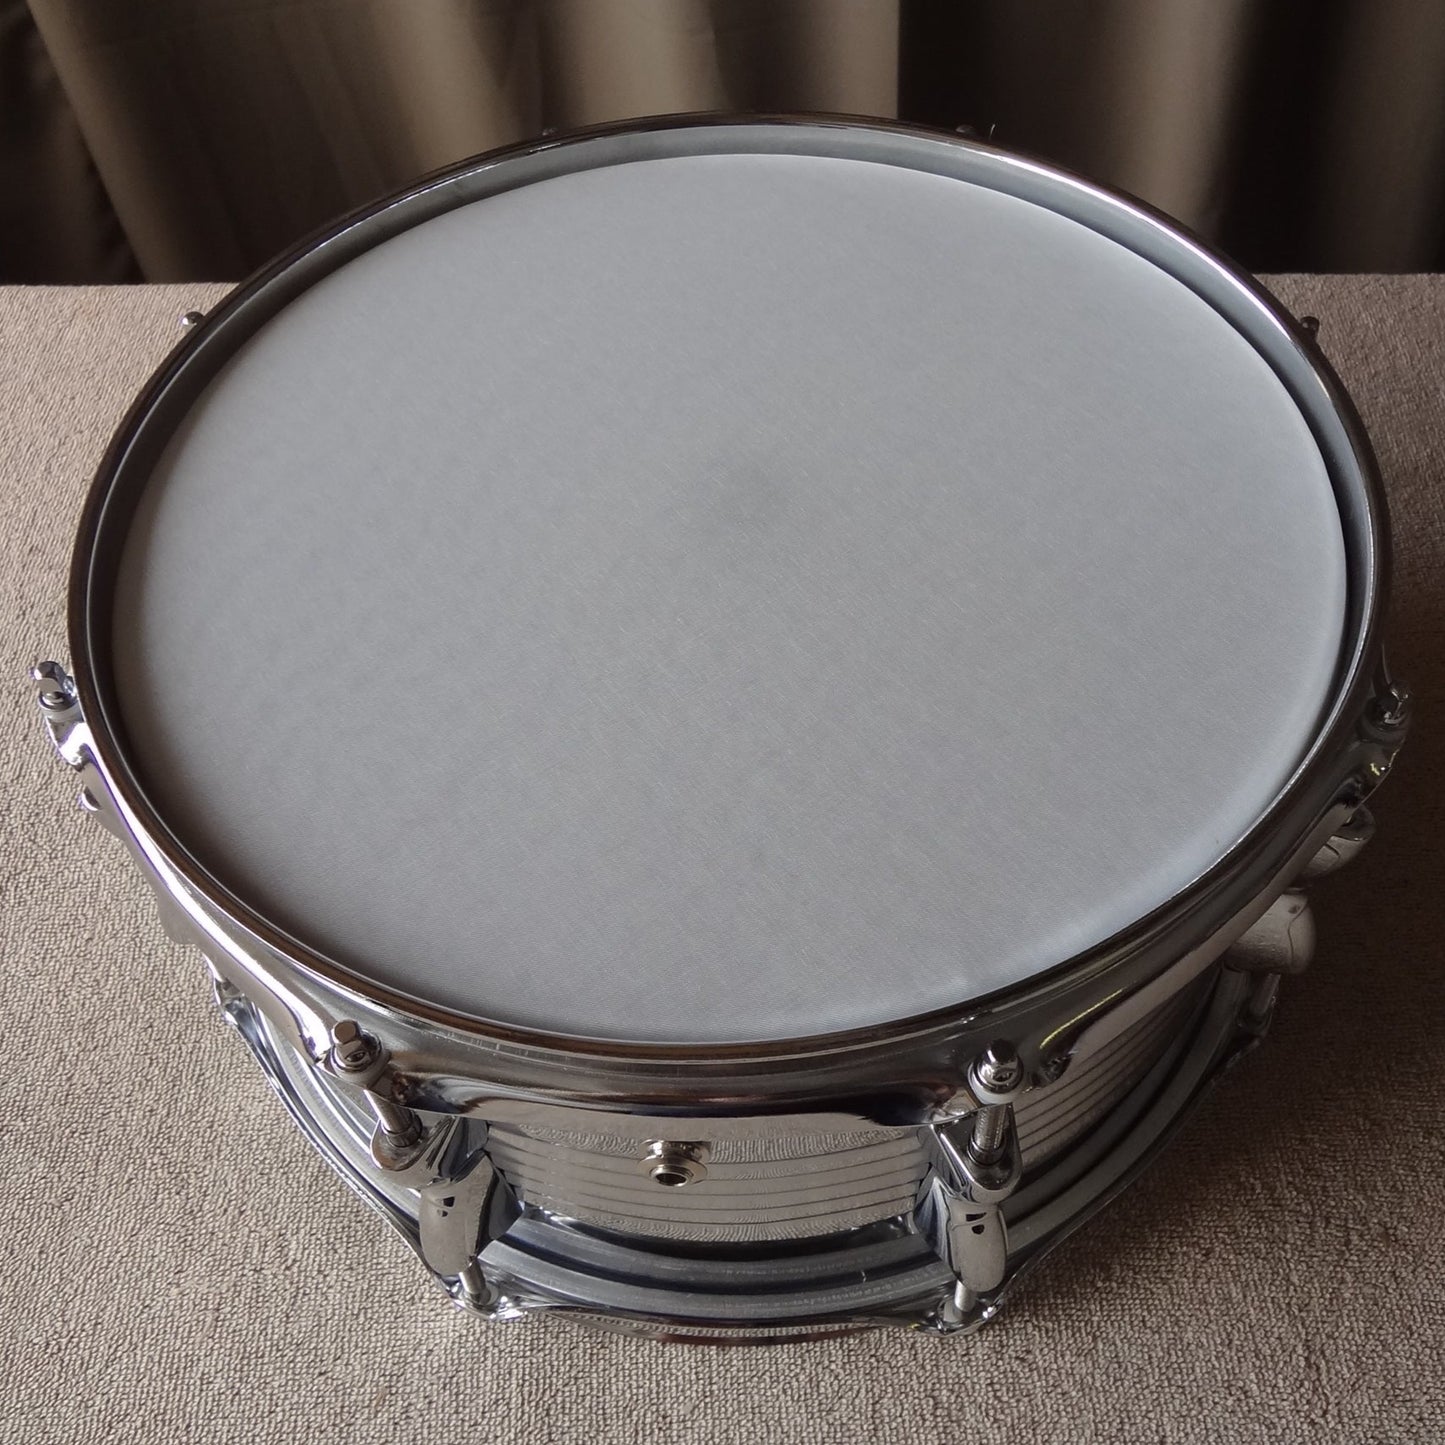 New 12 Inch Custom Electronic Snare Drum - Chrome Metal